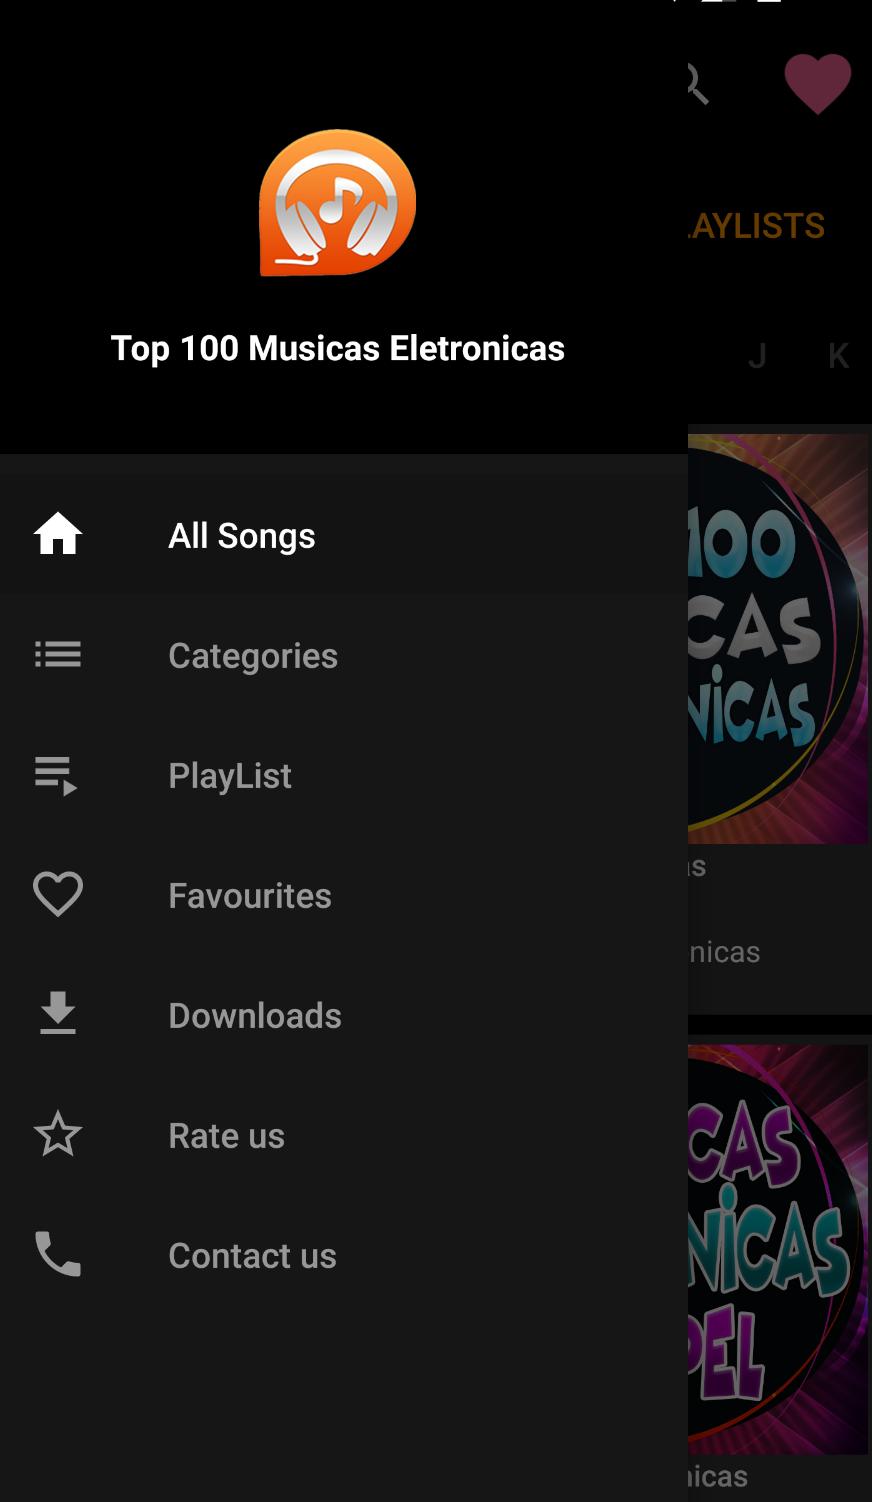 Top 100 Musicas Eletronicas for Android - APK Download